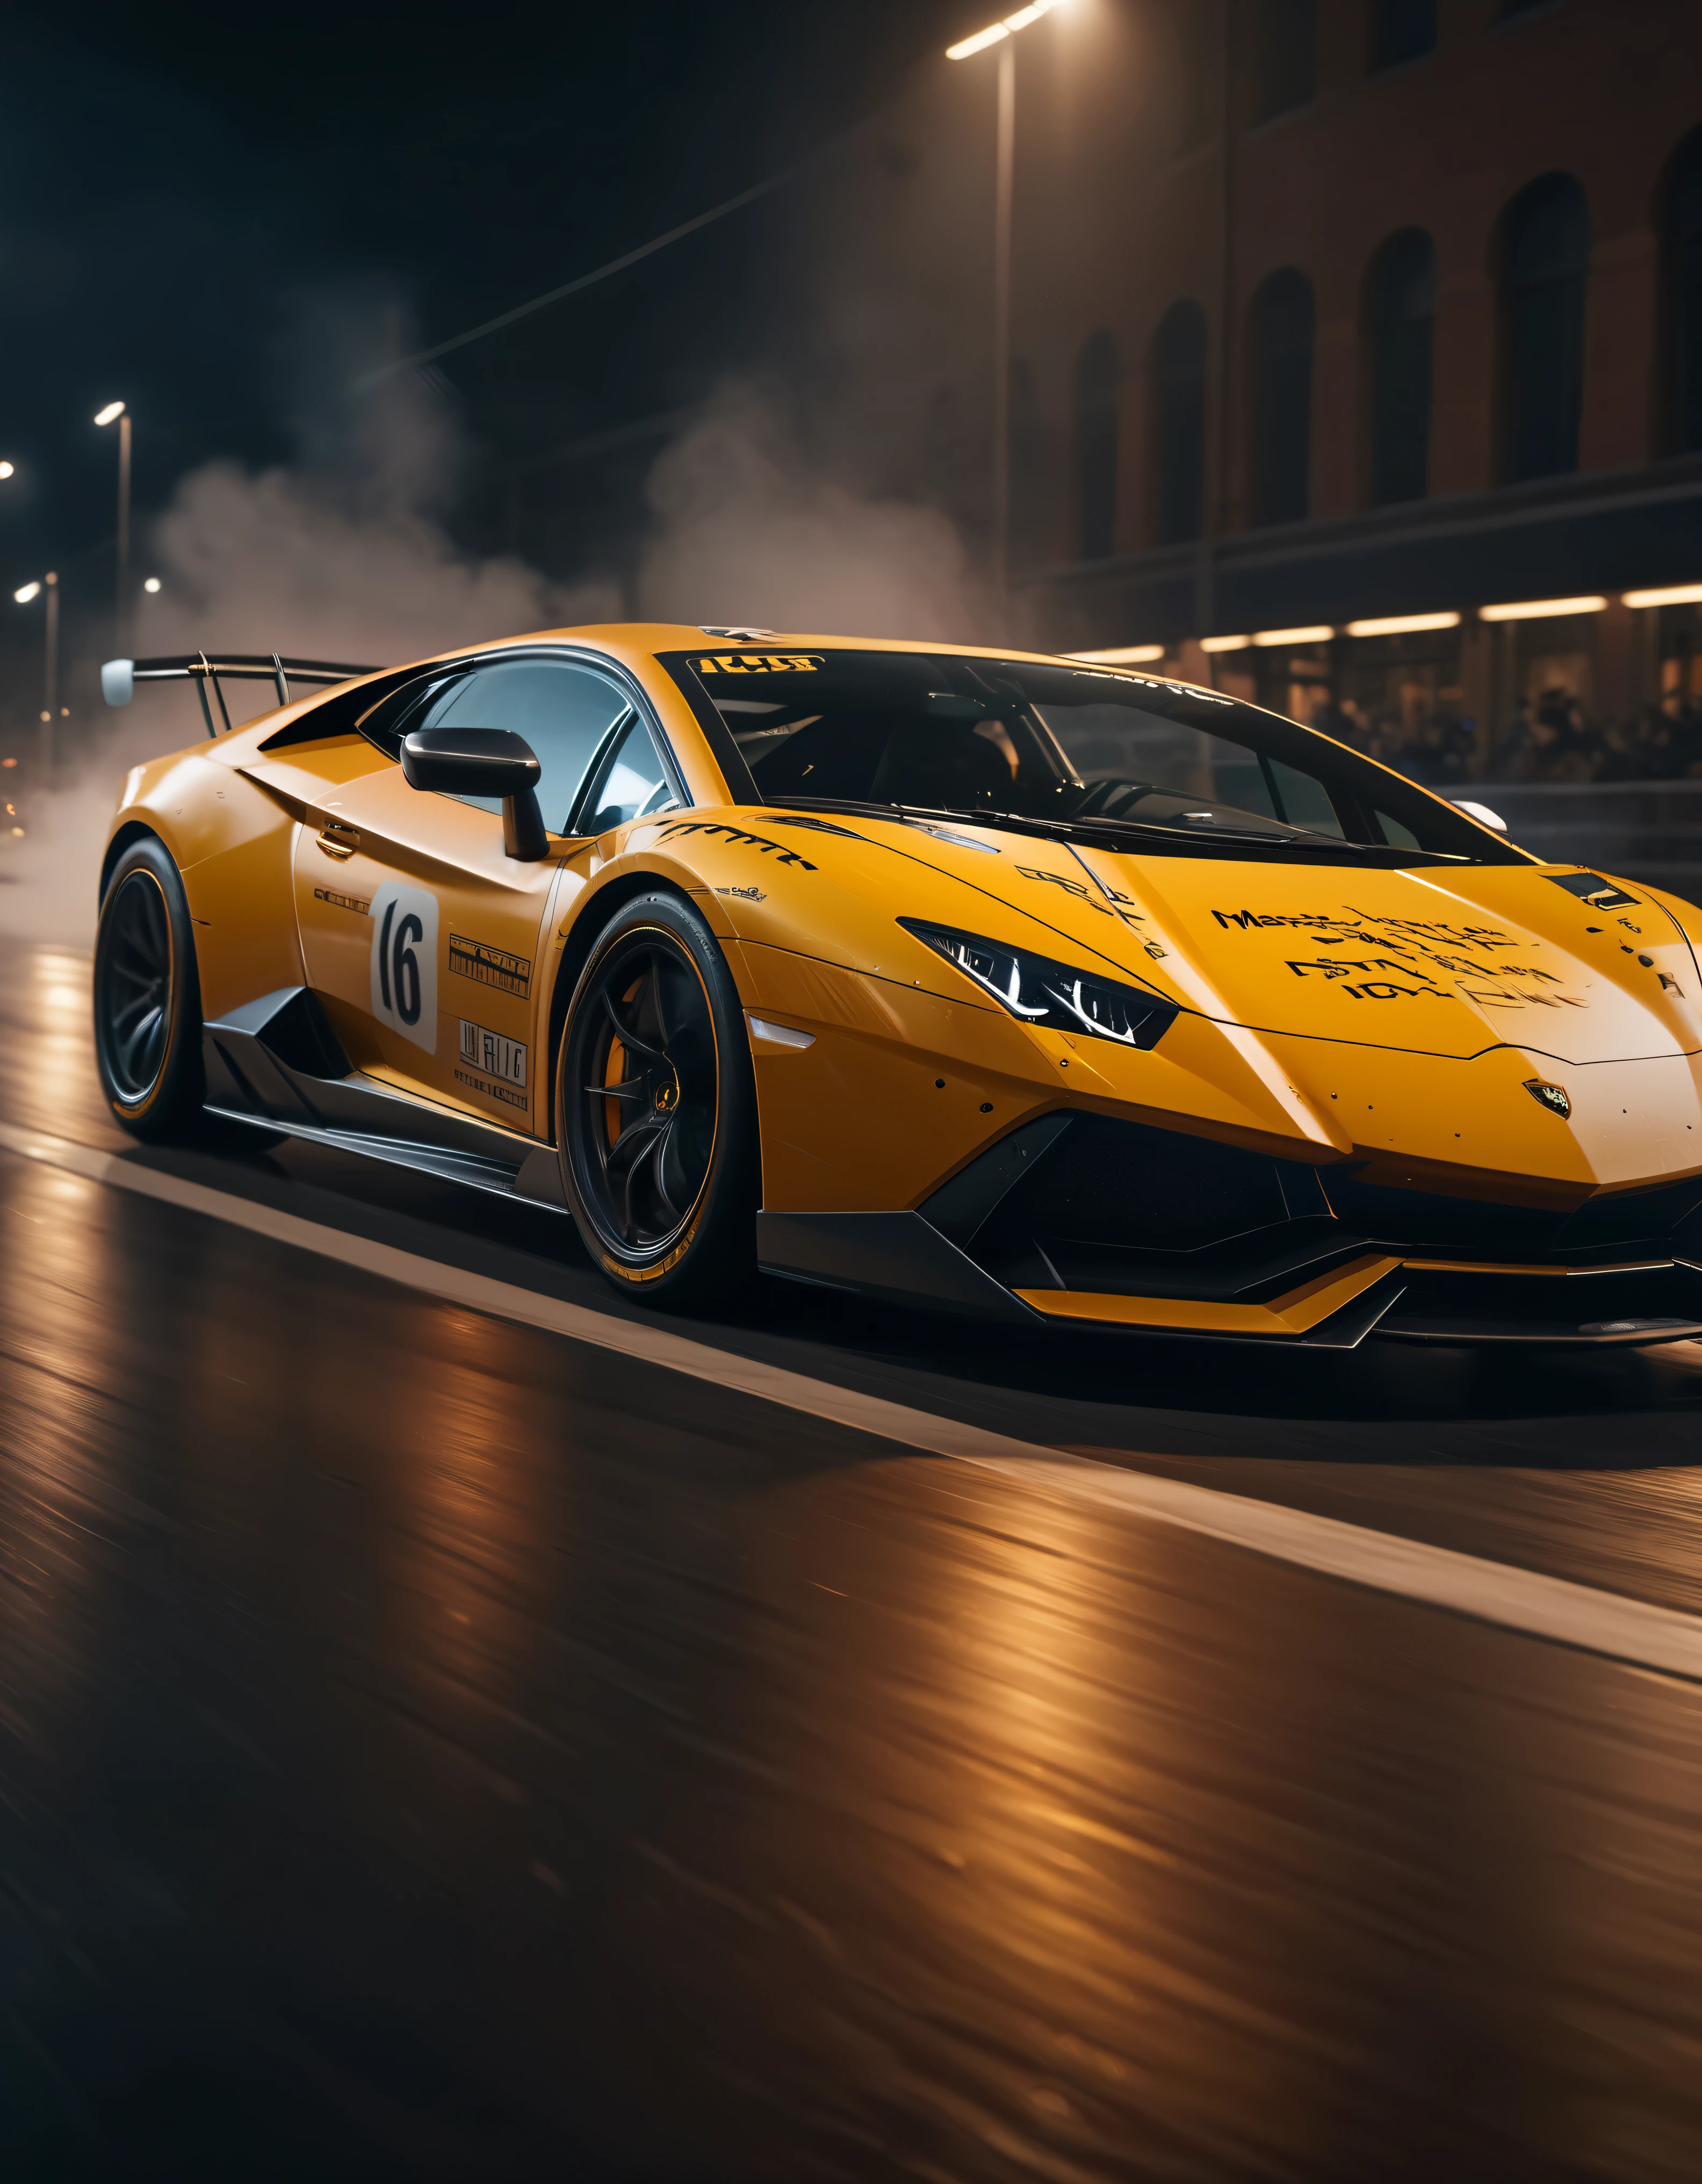 ((Masterpiece in maximum 16K resolution):1.6),((soft_color_photograpy:)1.5), ((Ultra-Detailed):1.4),((Movie-like still images and dynamic angles):1.3), ((motion blur):1.1) | (Cinematic photo of a speeding Lamborghini race car), (street race), (cinematic lens), ((tyndall effect):1.1), (Street light), (smoke), (super car), (Night at City Street), (sense of speed), (shimmer), (visual experience), (Realism), (Realistic), award-winning graphics, dark shot, film grain, extremely detailed, Digital Art, rtx, Unreal Engine, scene concept anti glare effect, All captured with sharp focus.

Rendered in ultra-high definition with UHD and retina quality, this masterpiece ensures anatomical correctness and textured skin with super detail. With a focus on high quality and accuracy, this award-winning portrayal captures every nuance in stunning 16k resolution, immersing viewers in its lifelike depiction. Avoid extreme angles or exaggerated expressions to maintain realism.